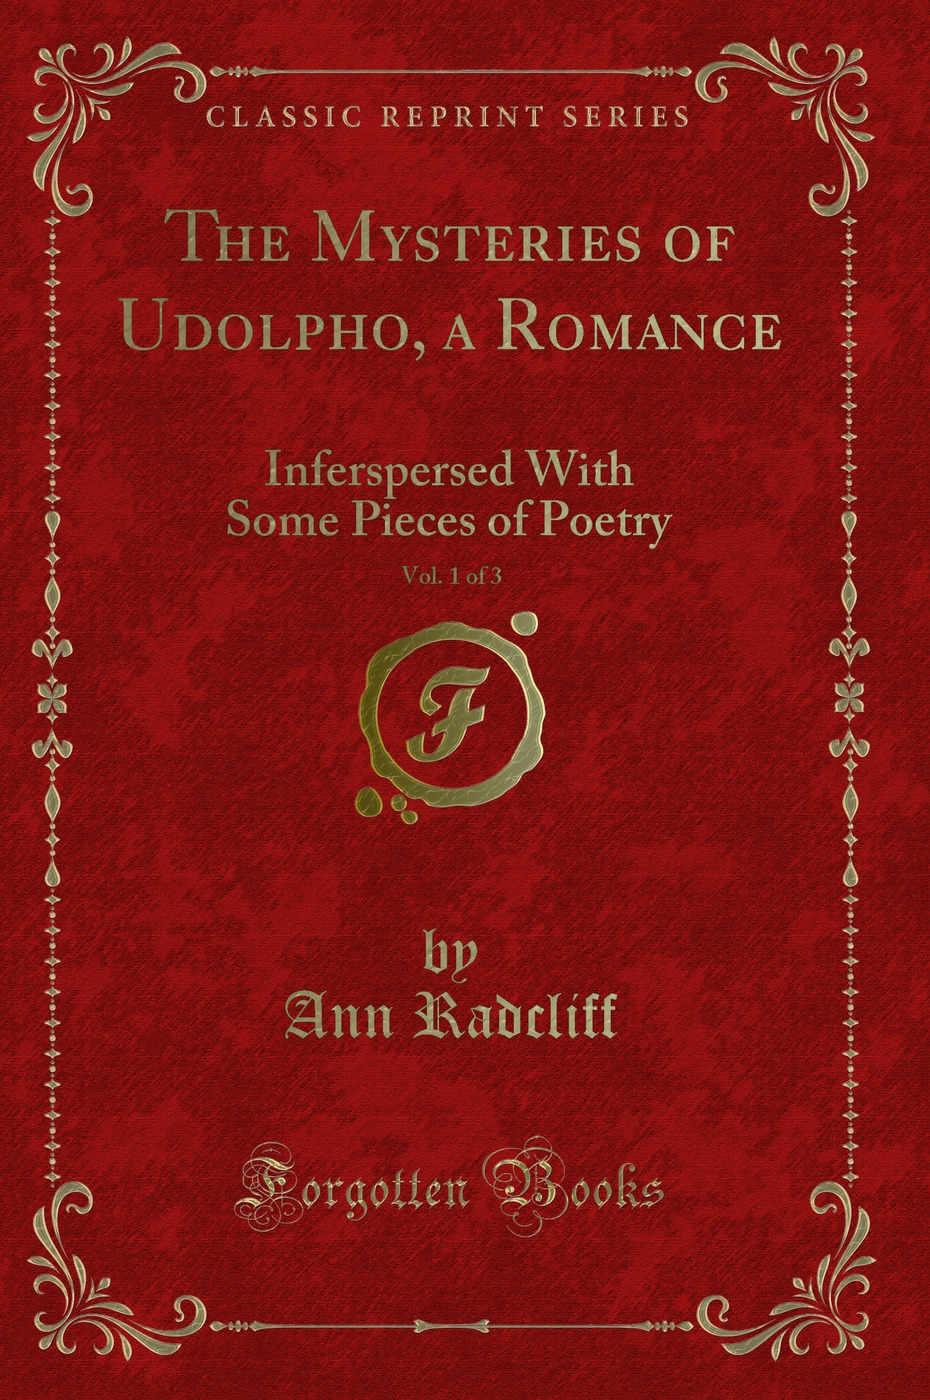 The Mysteries of Udolpho, a Romance, Vol. 1 of 3 (Classic Reprint) - Ann Radcliff